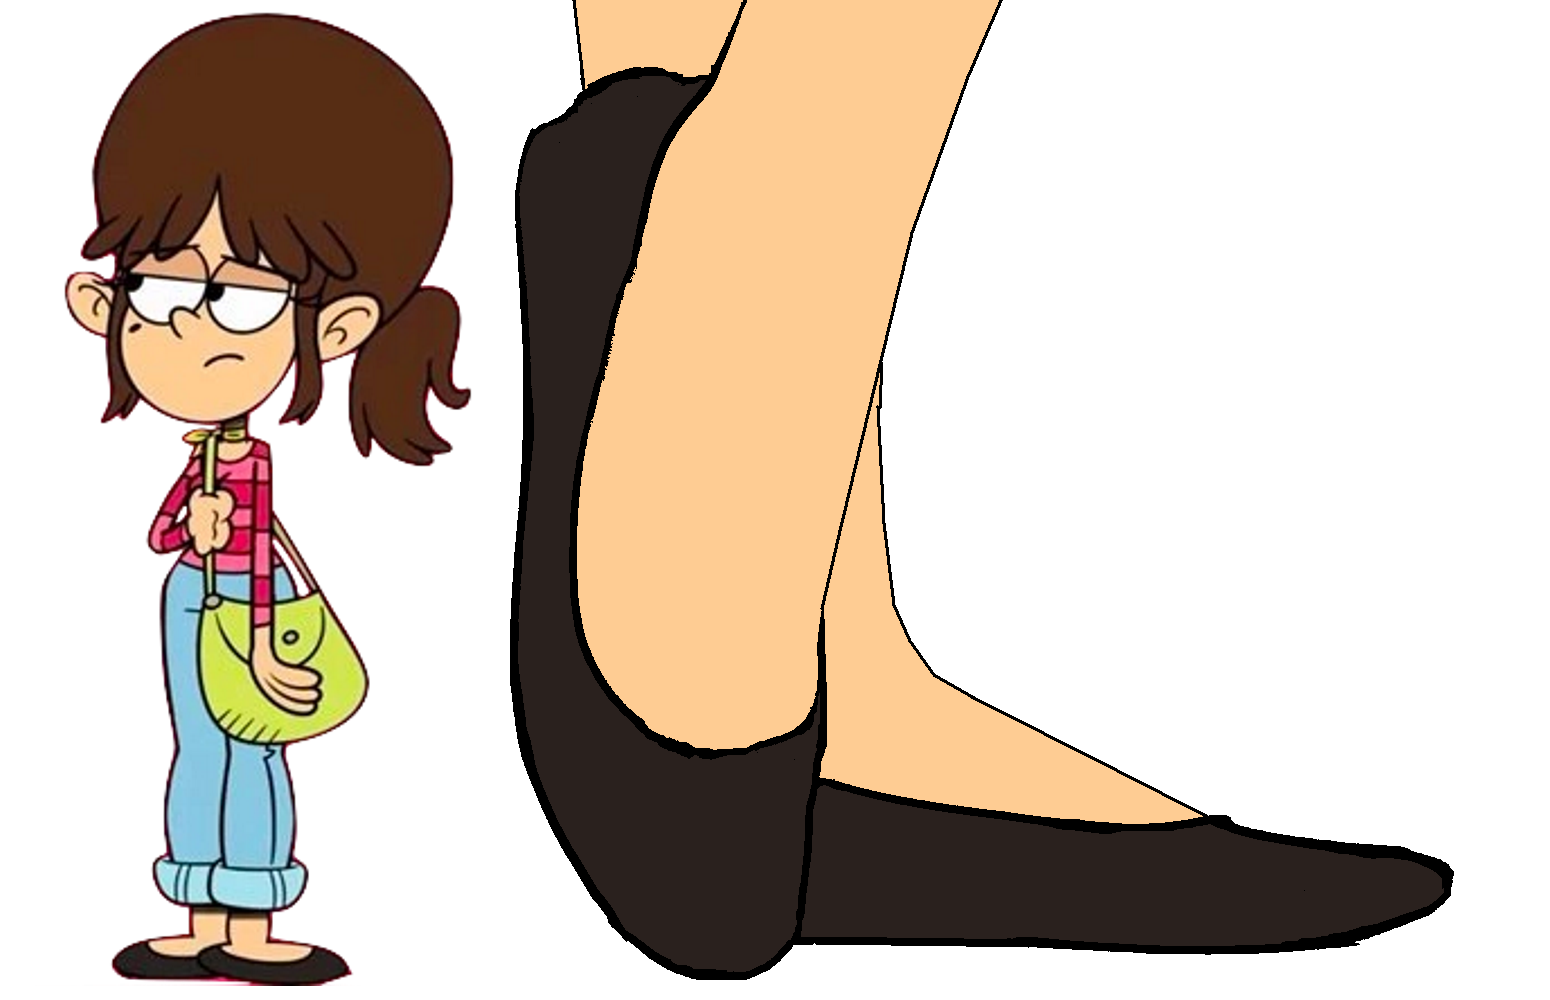 Fiona (The Loud House) in Flats by BrendyFlatsMJFF on DeviantArt